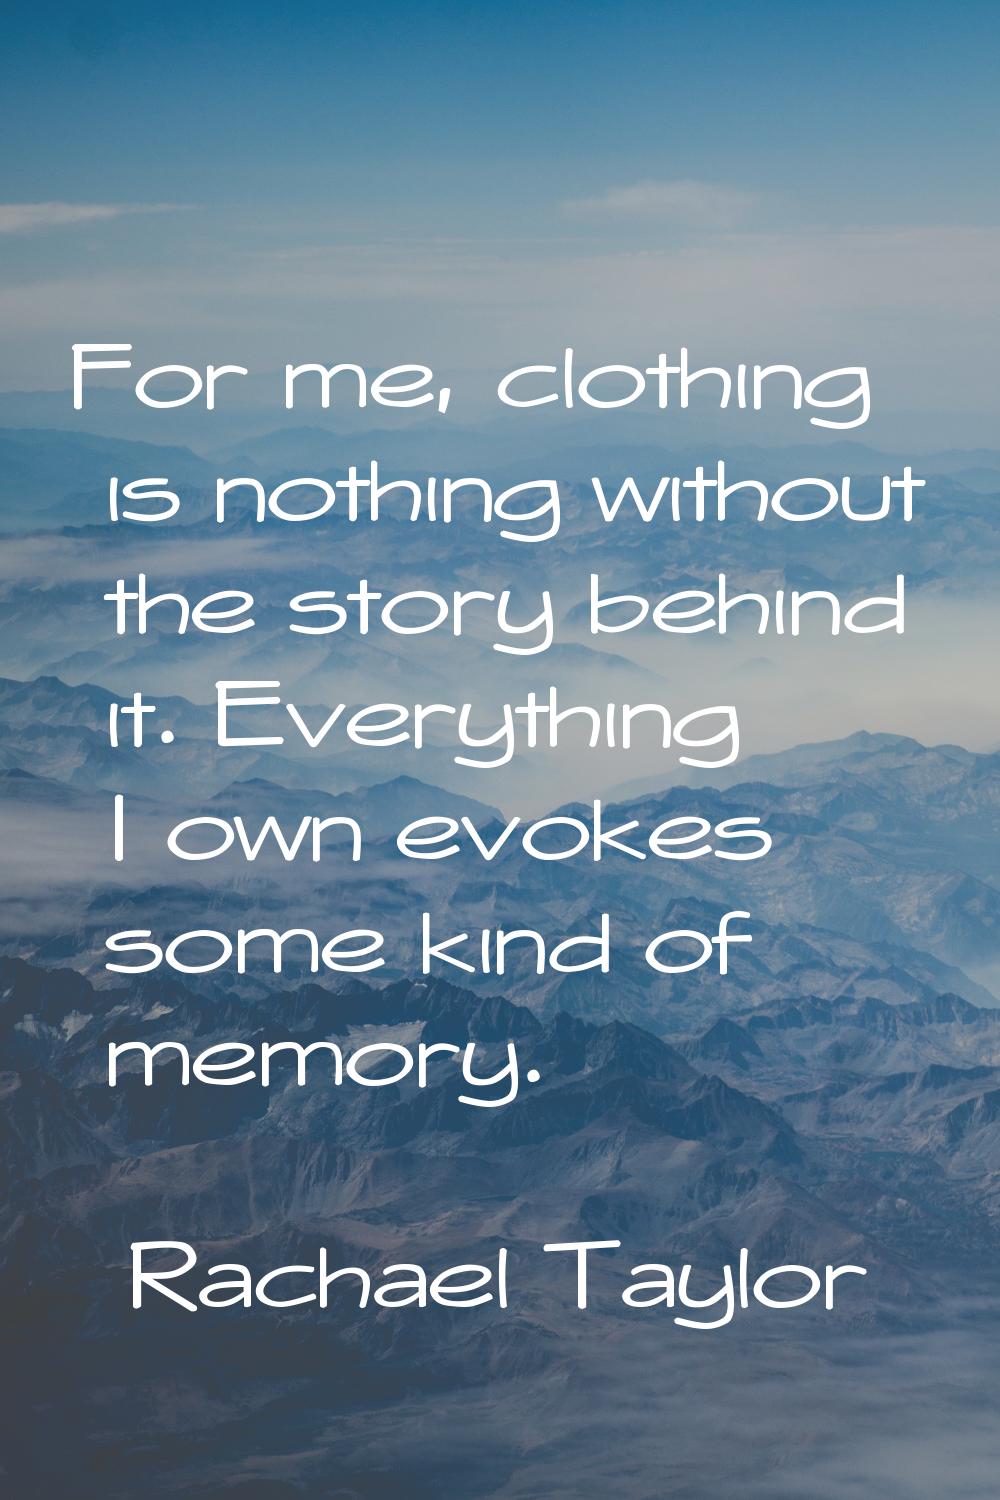 For me, clothing is nothing without the story behind it. Everything I own evokes some kind of memor